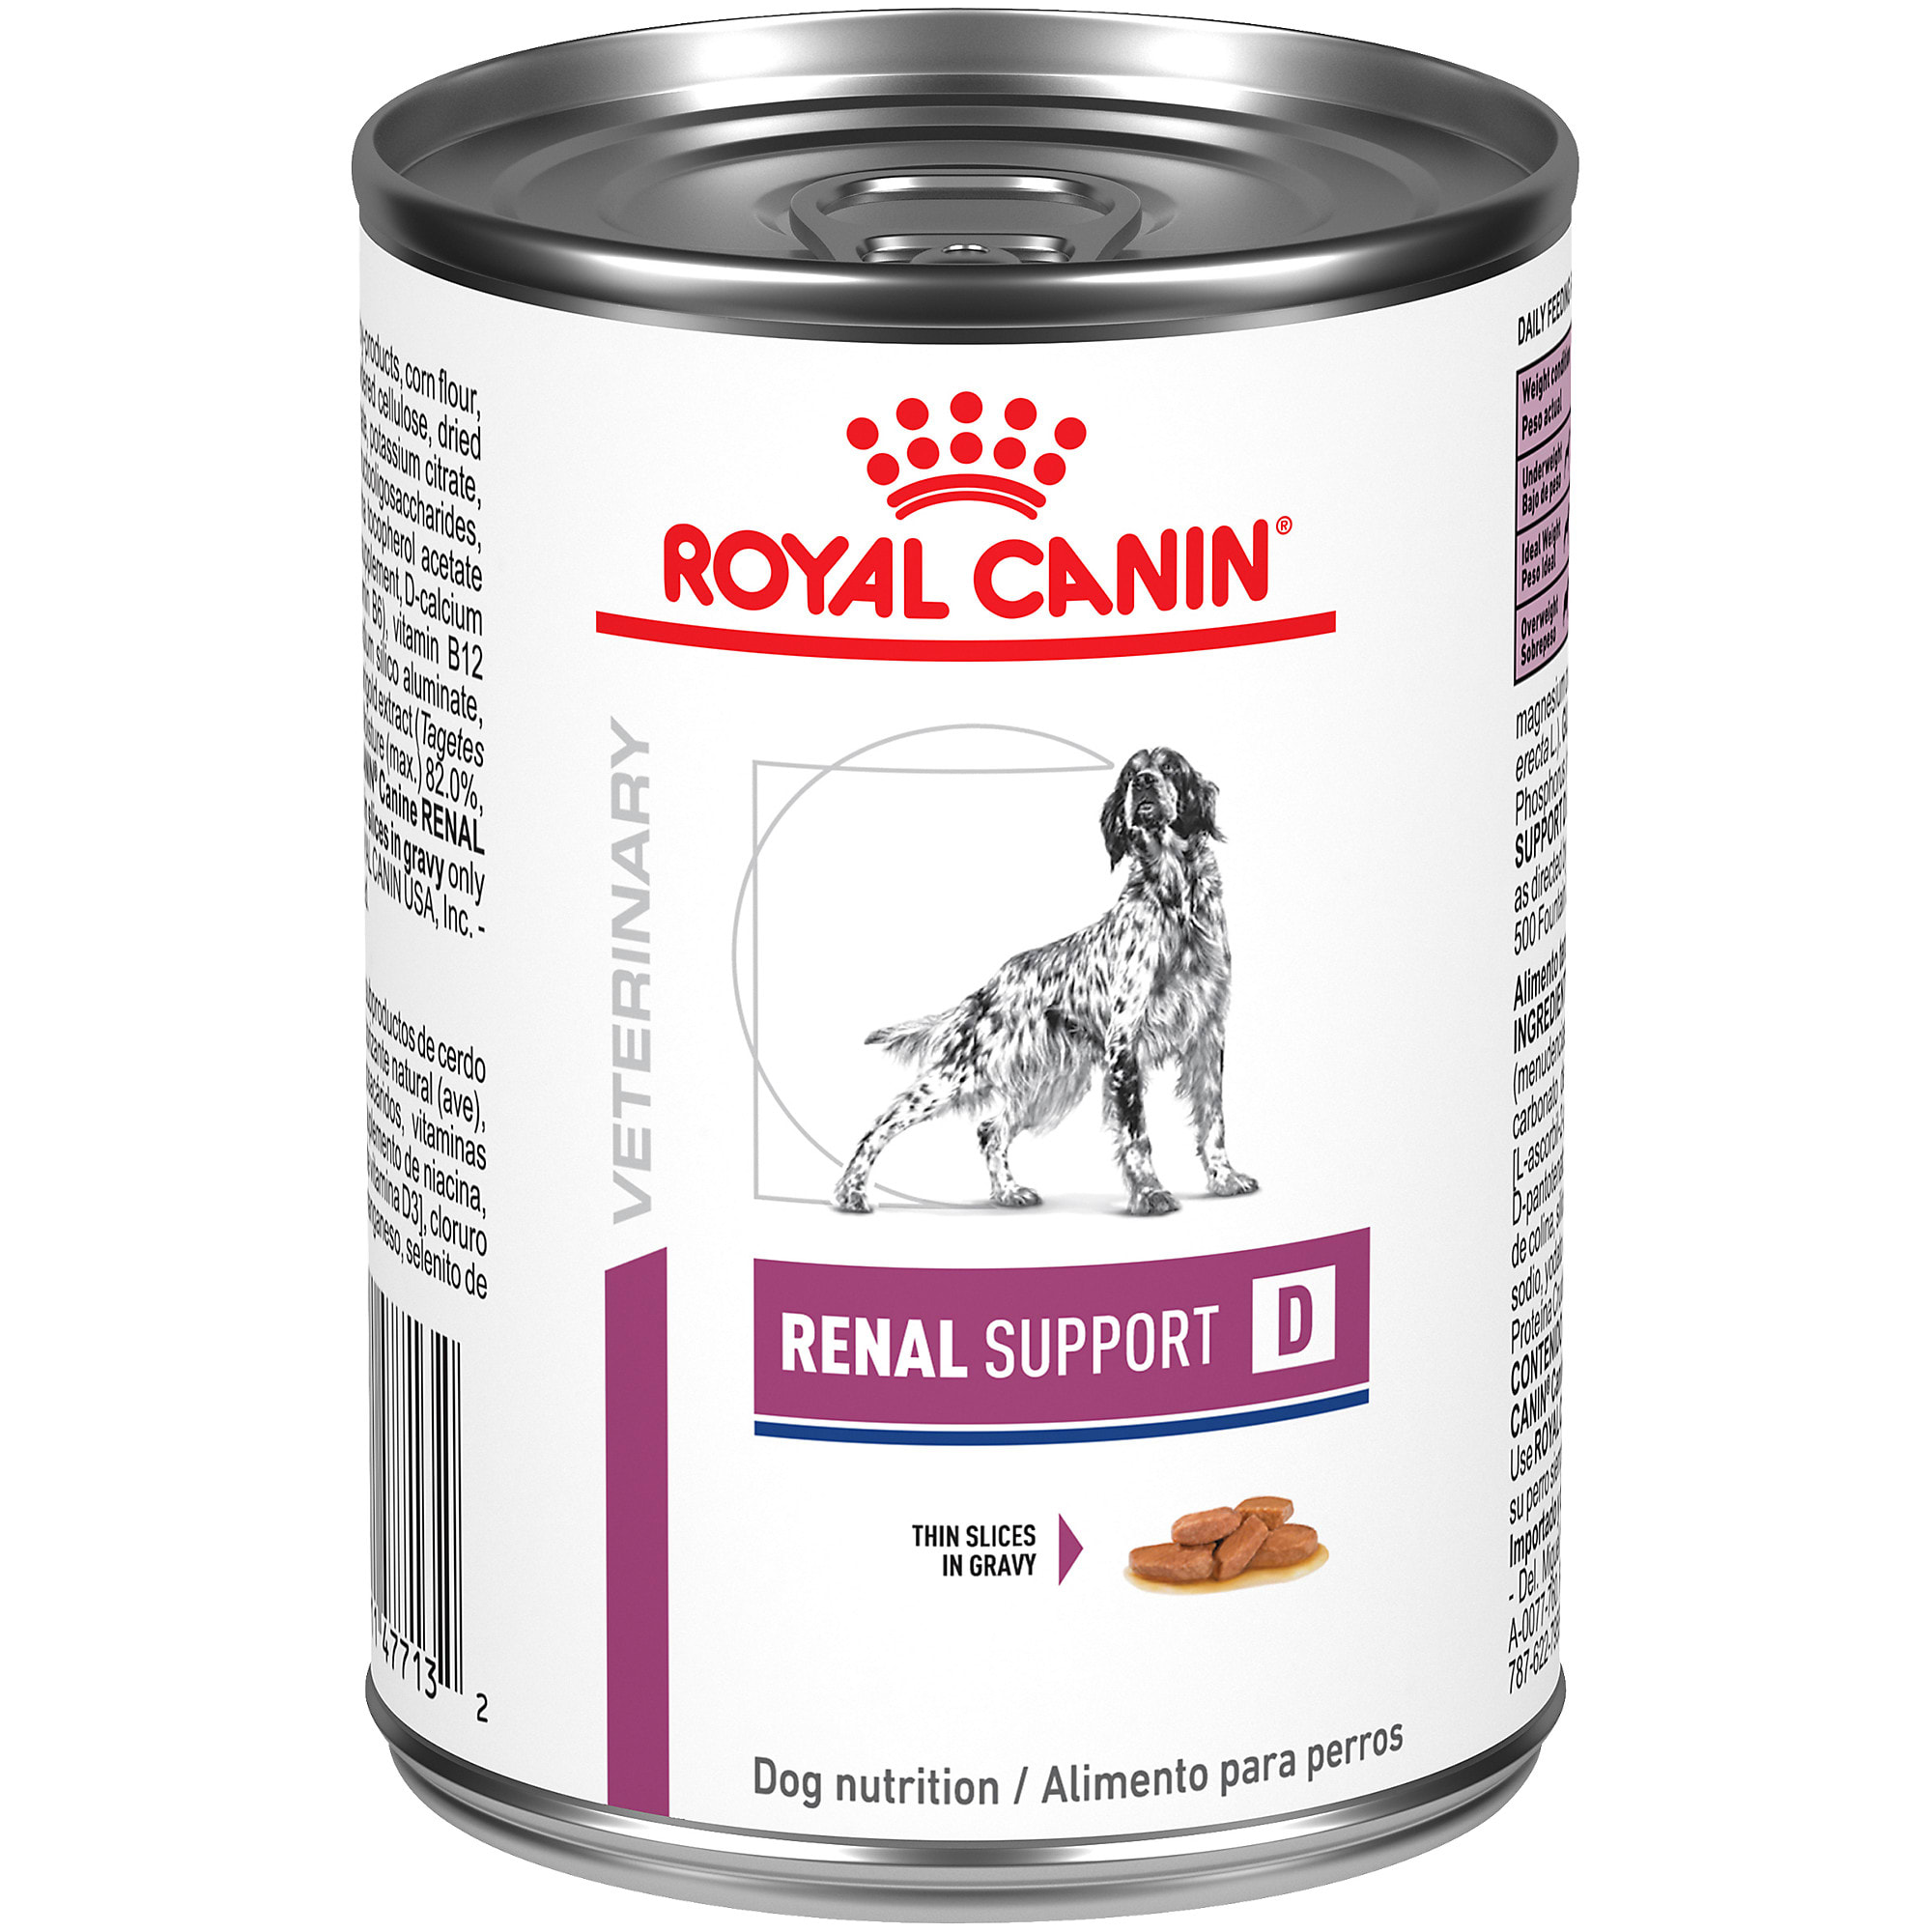 Gematigd atoom Zenuwinzinking Royal Canin Veterinary Diet Renal Support D Thin Slices in Gravy Canned Wet  Dog Food, 13 oz., Case of 24 | Petco